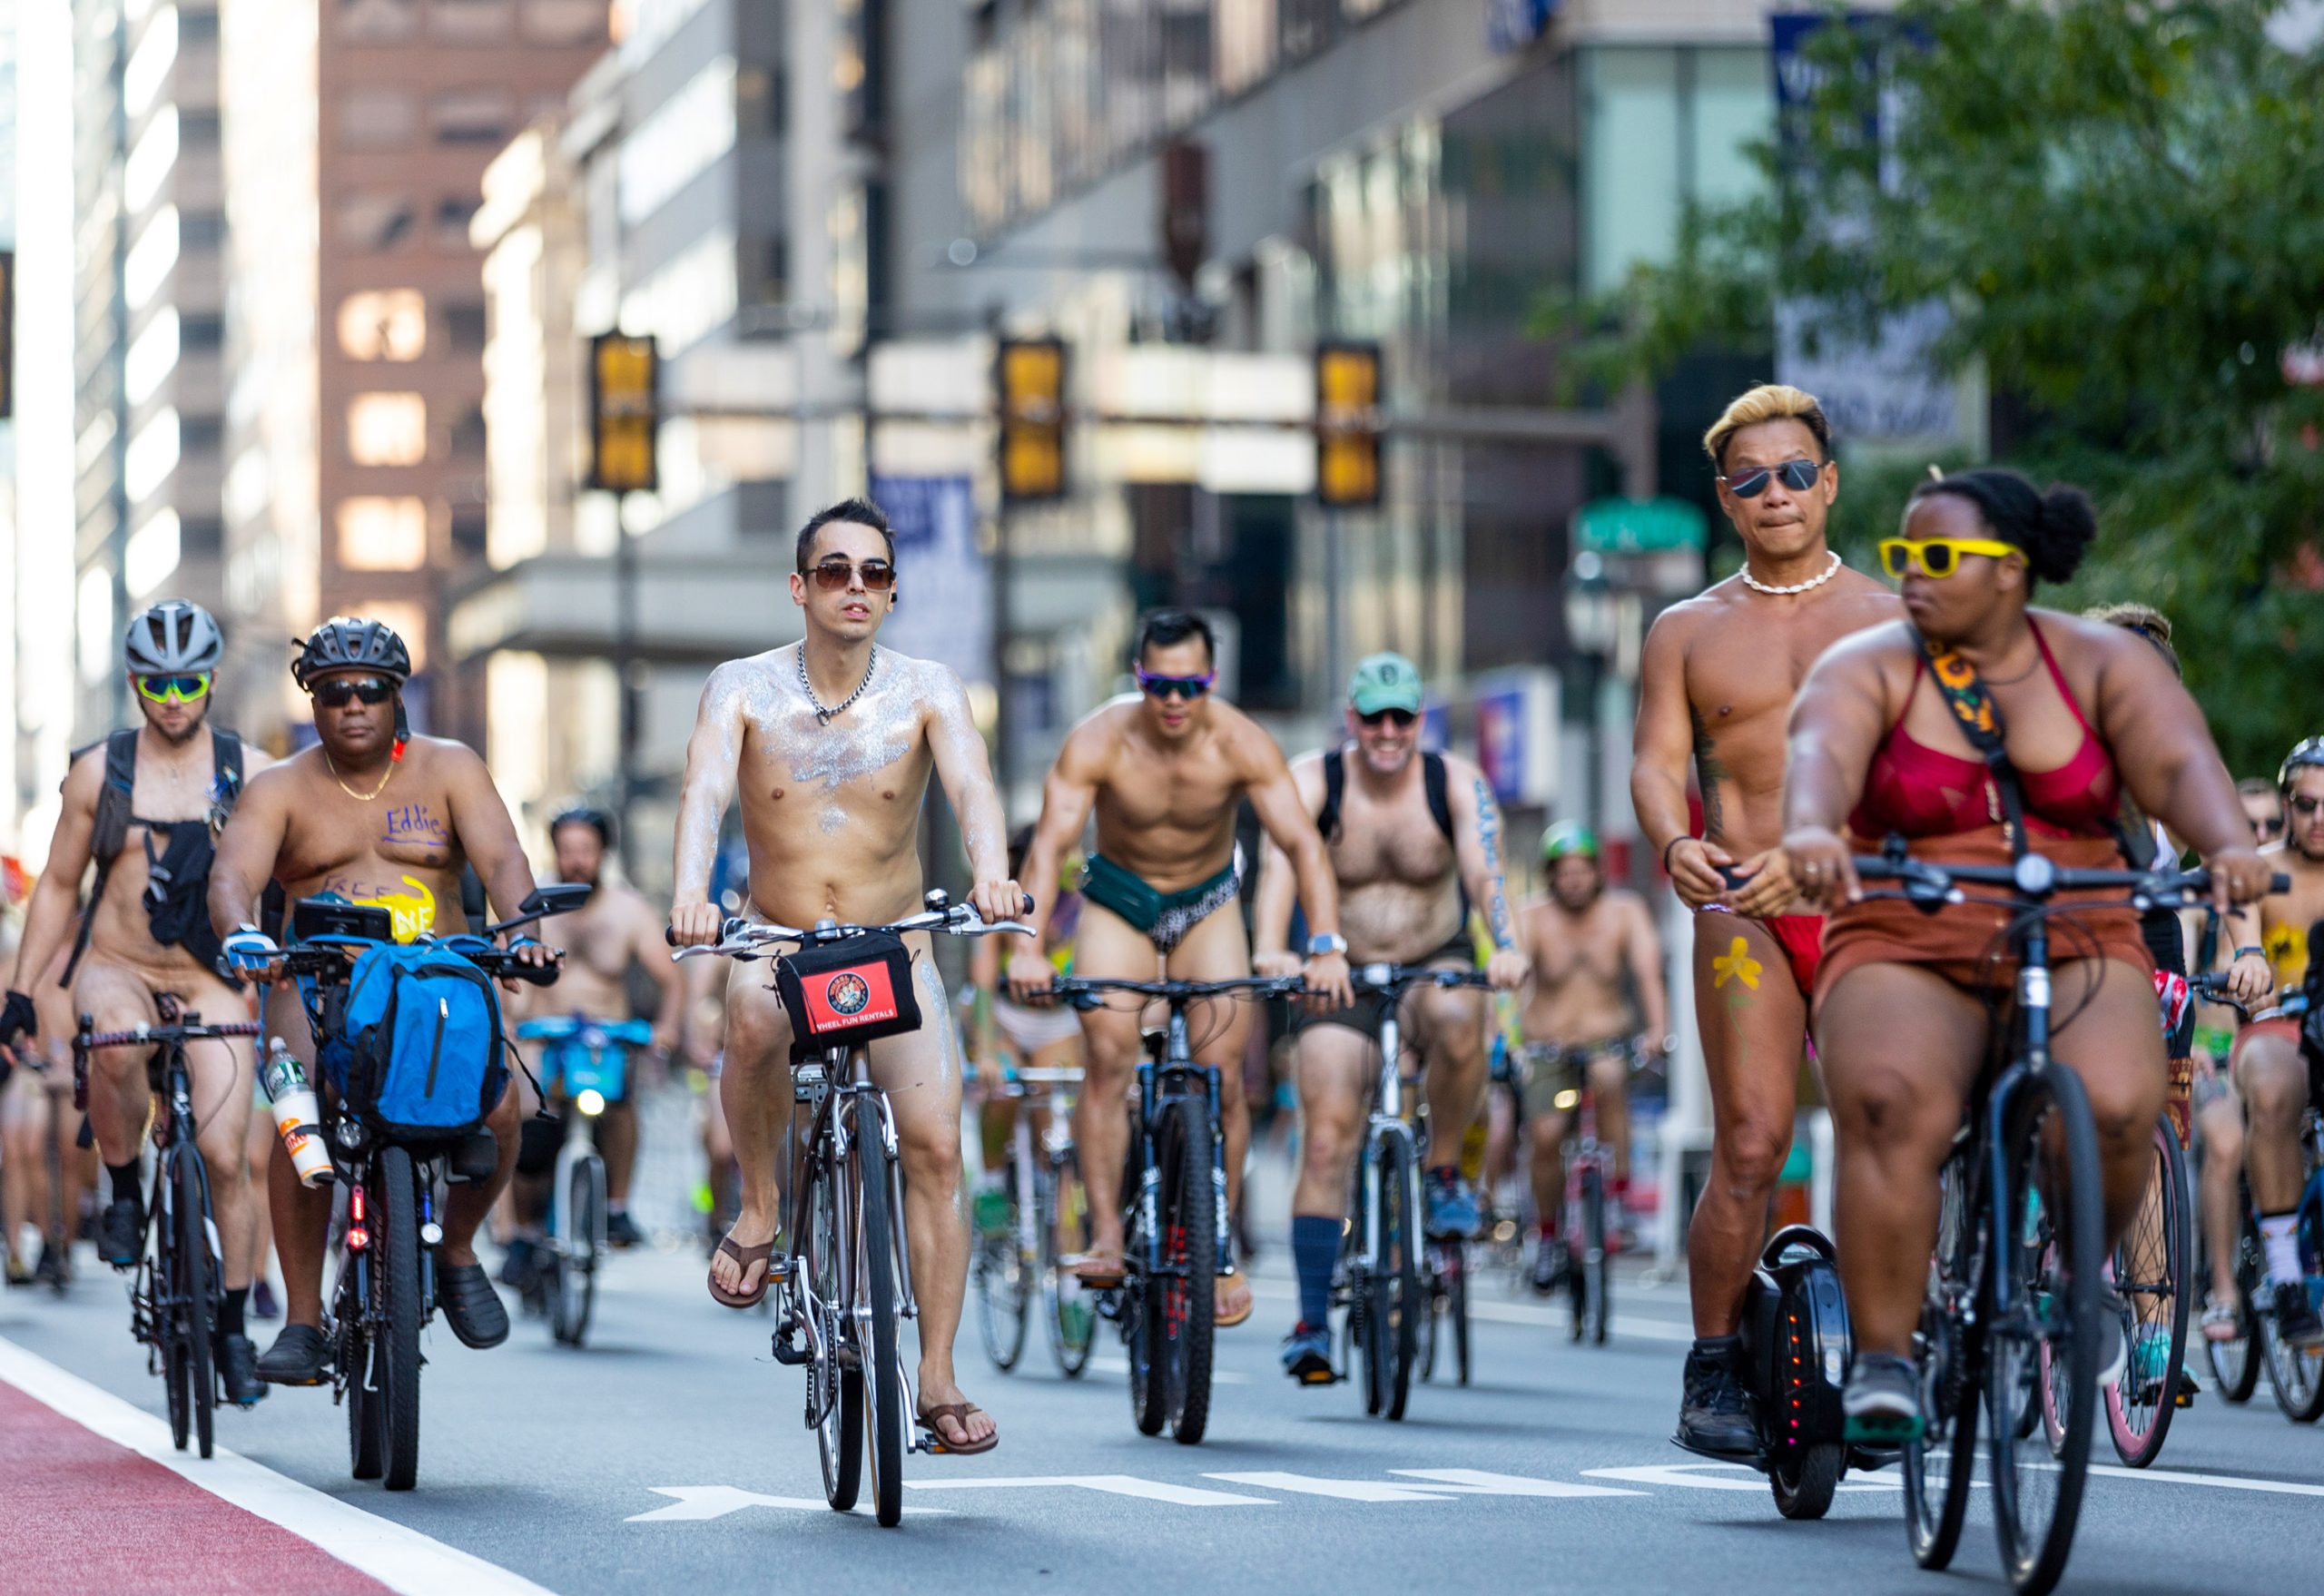 dan weckwerth recommends Philly Naked Bike Ride Pictures